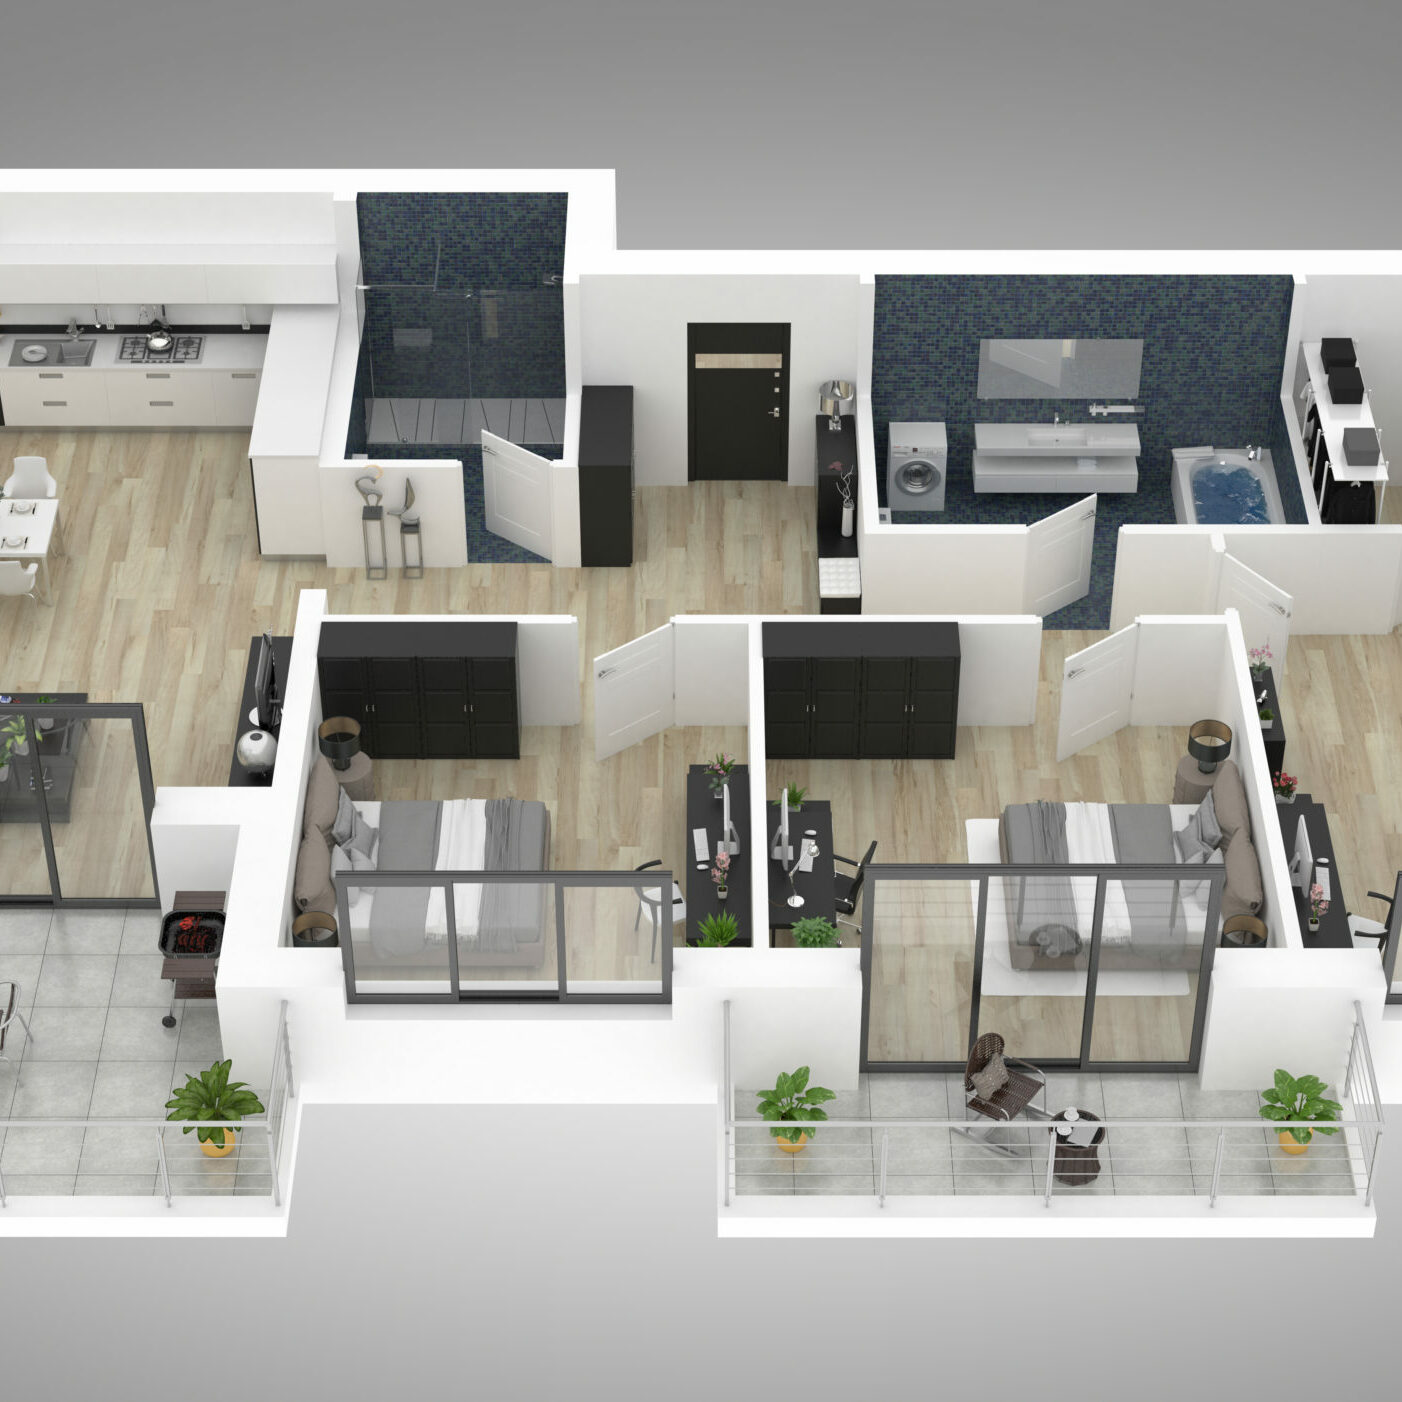 Floor,Plan,Of,A,House,Top,View,3d,Illustration.,Open